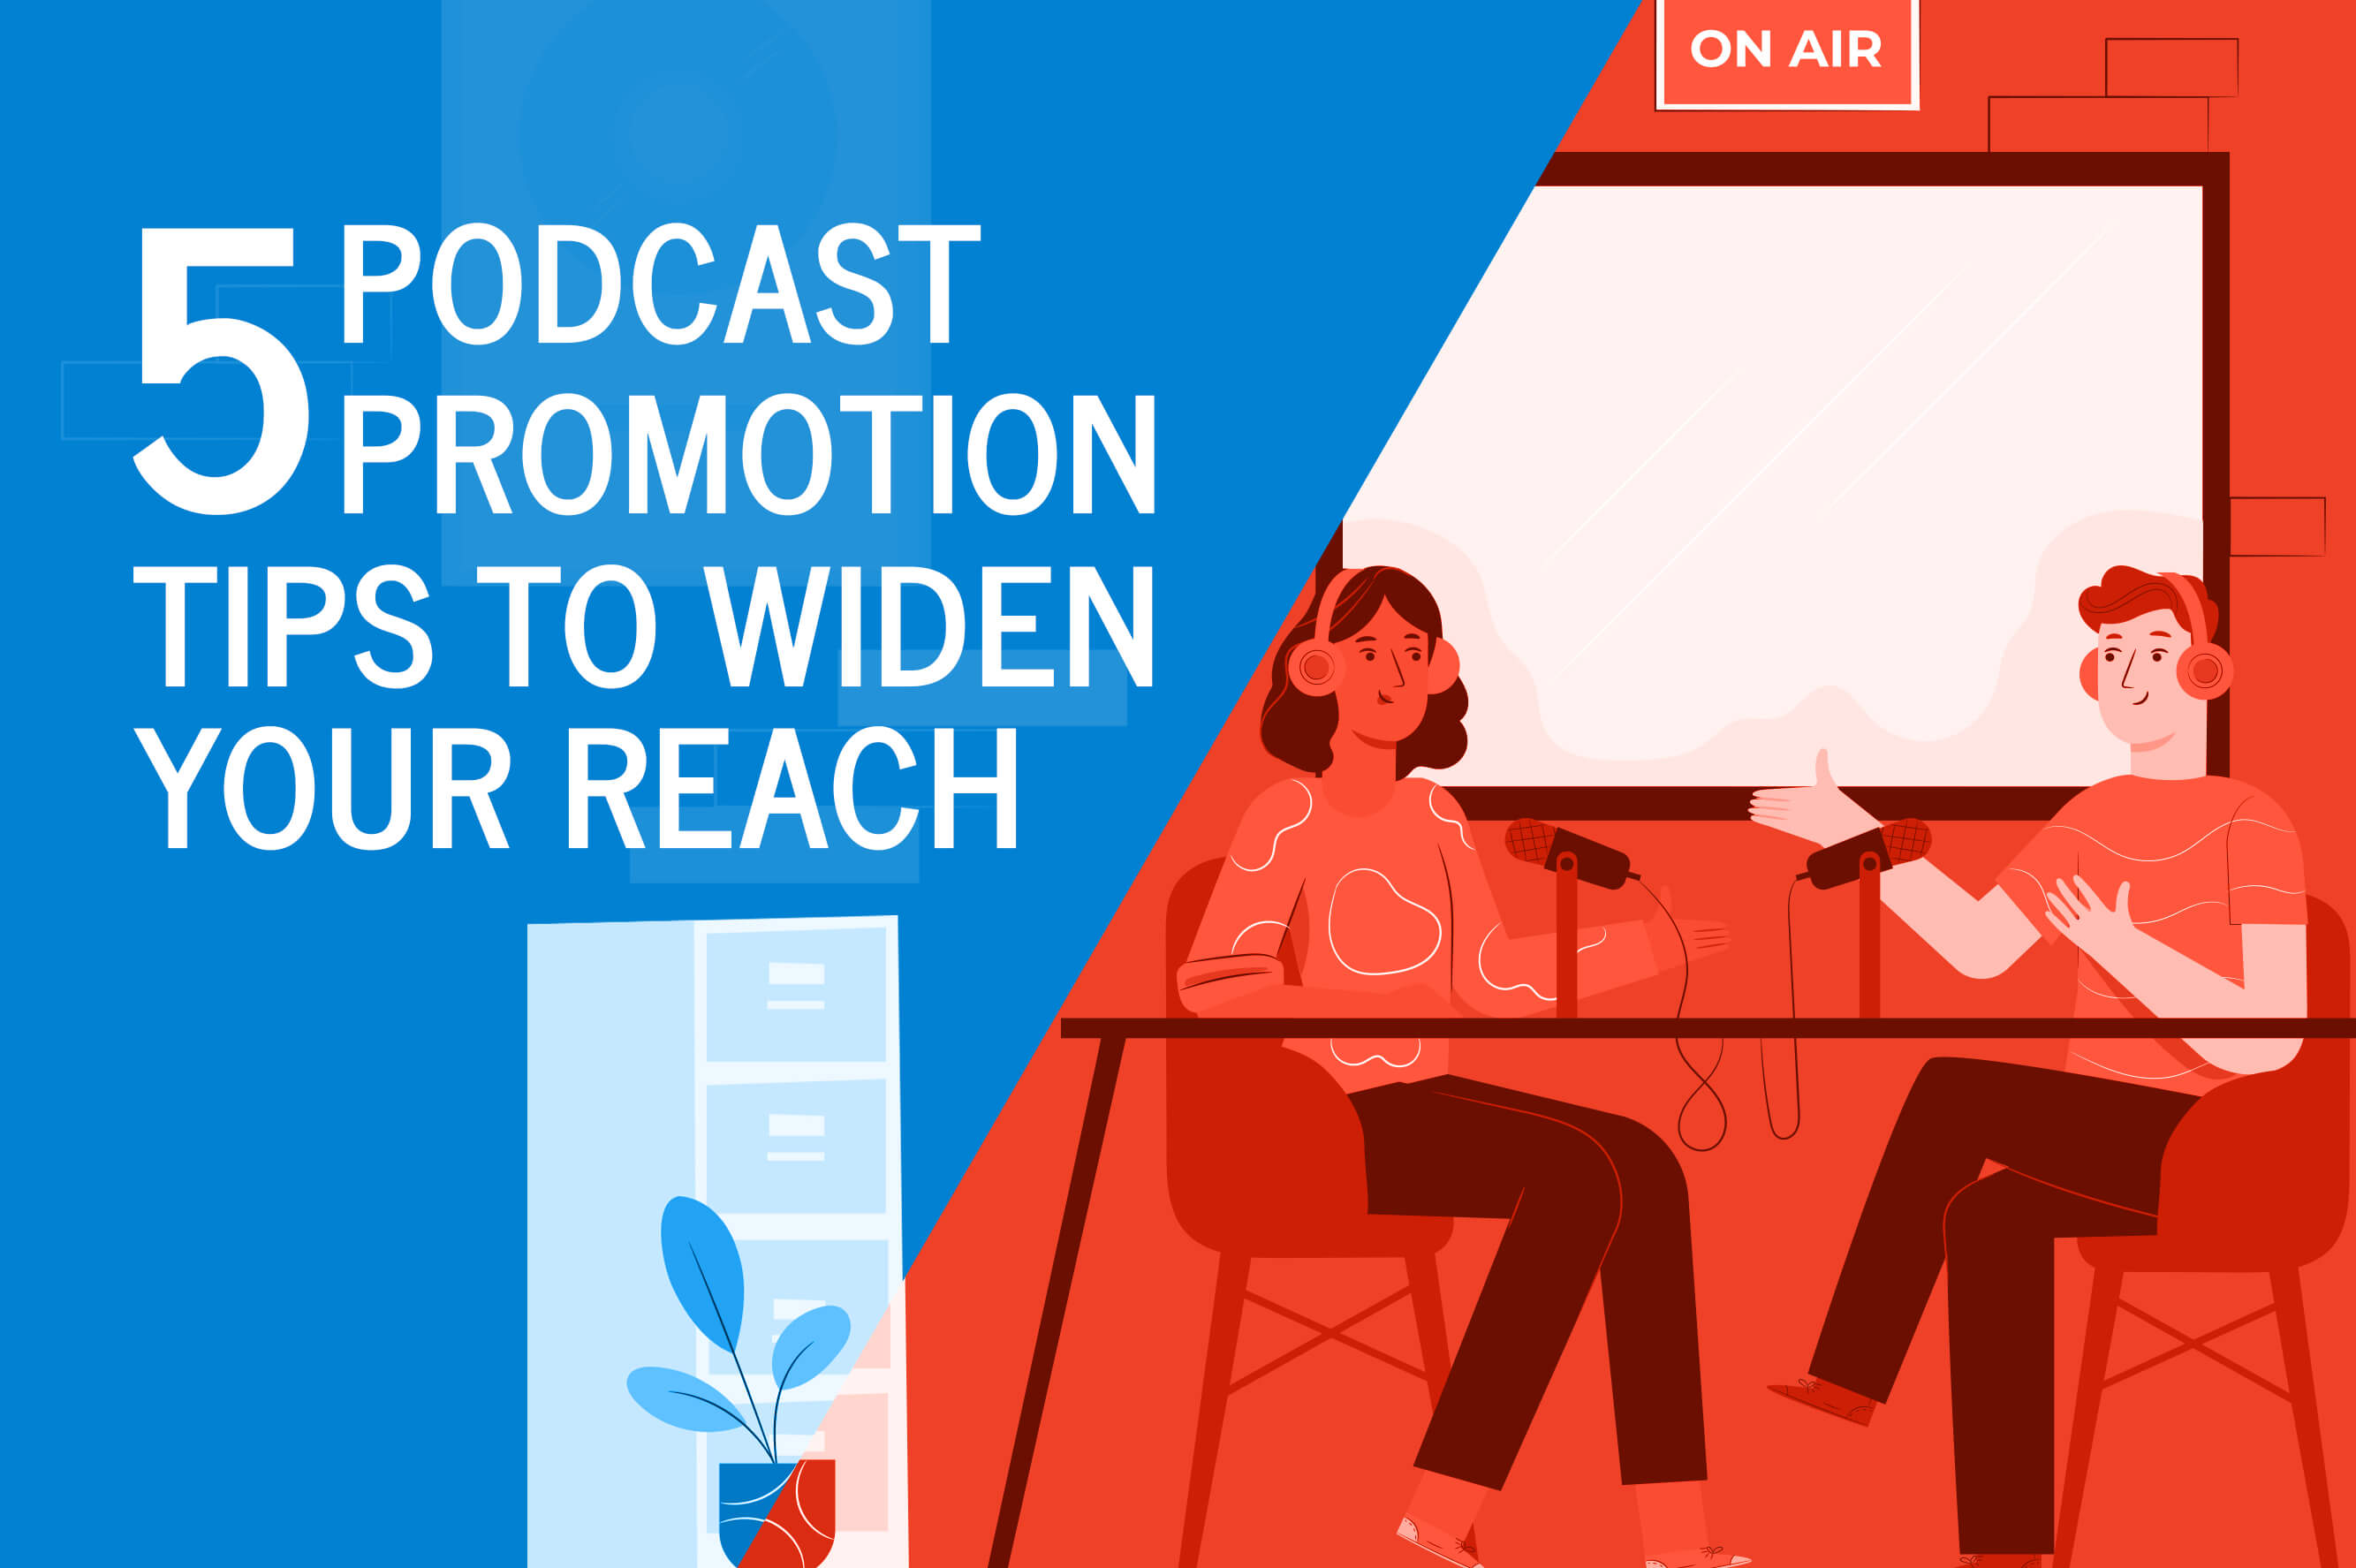 5 Podcast Promotion Tips to Widen Your Reach